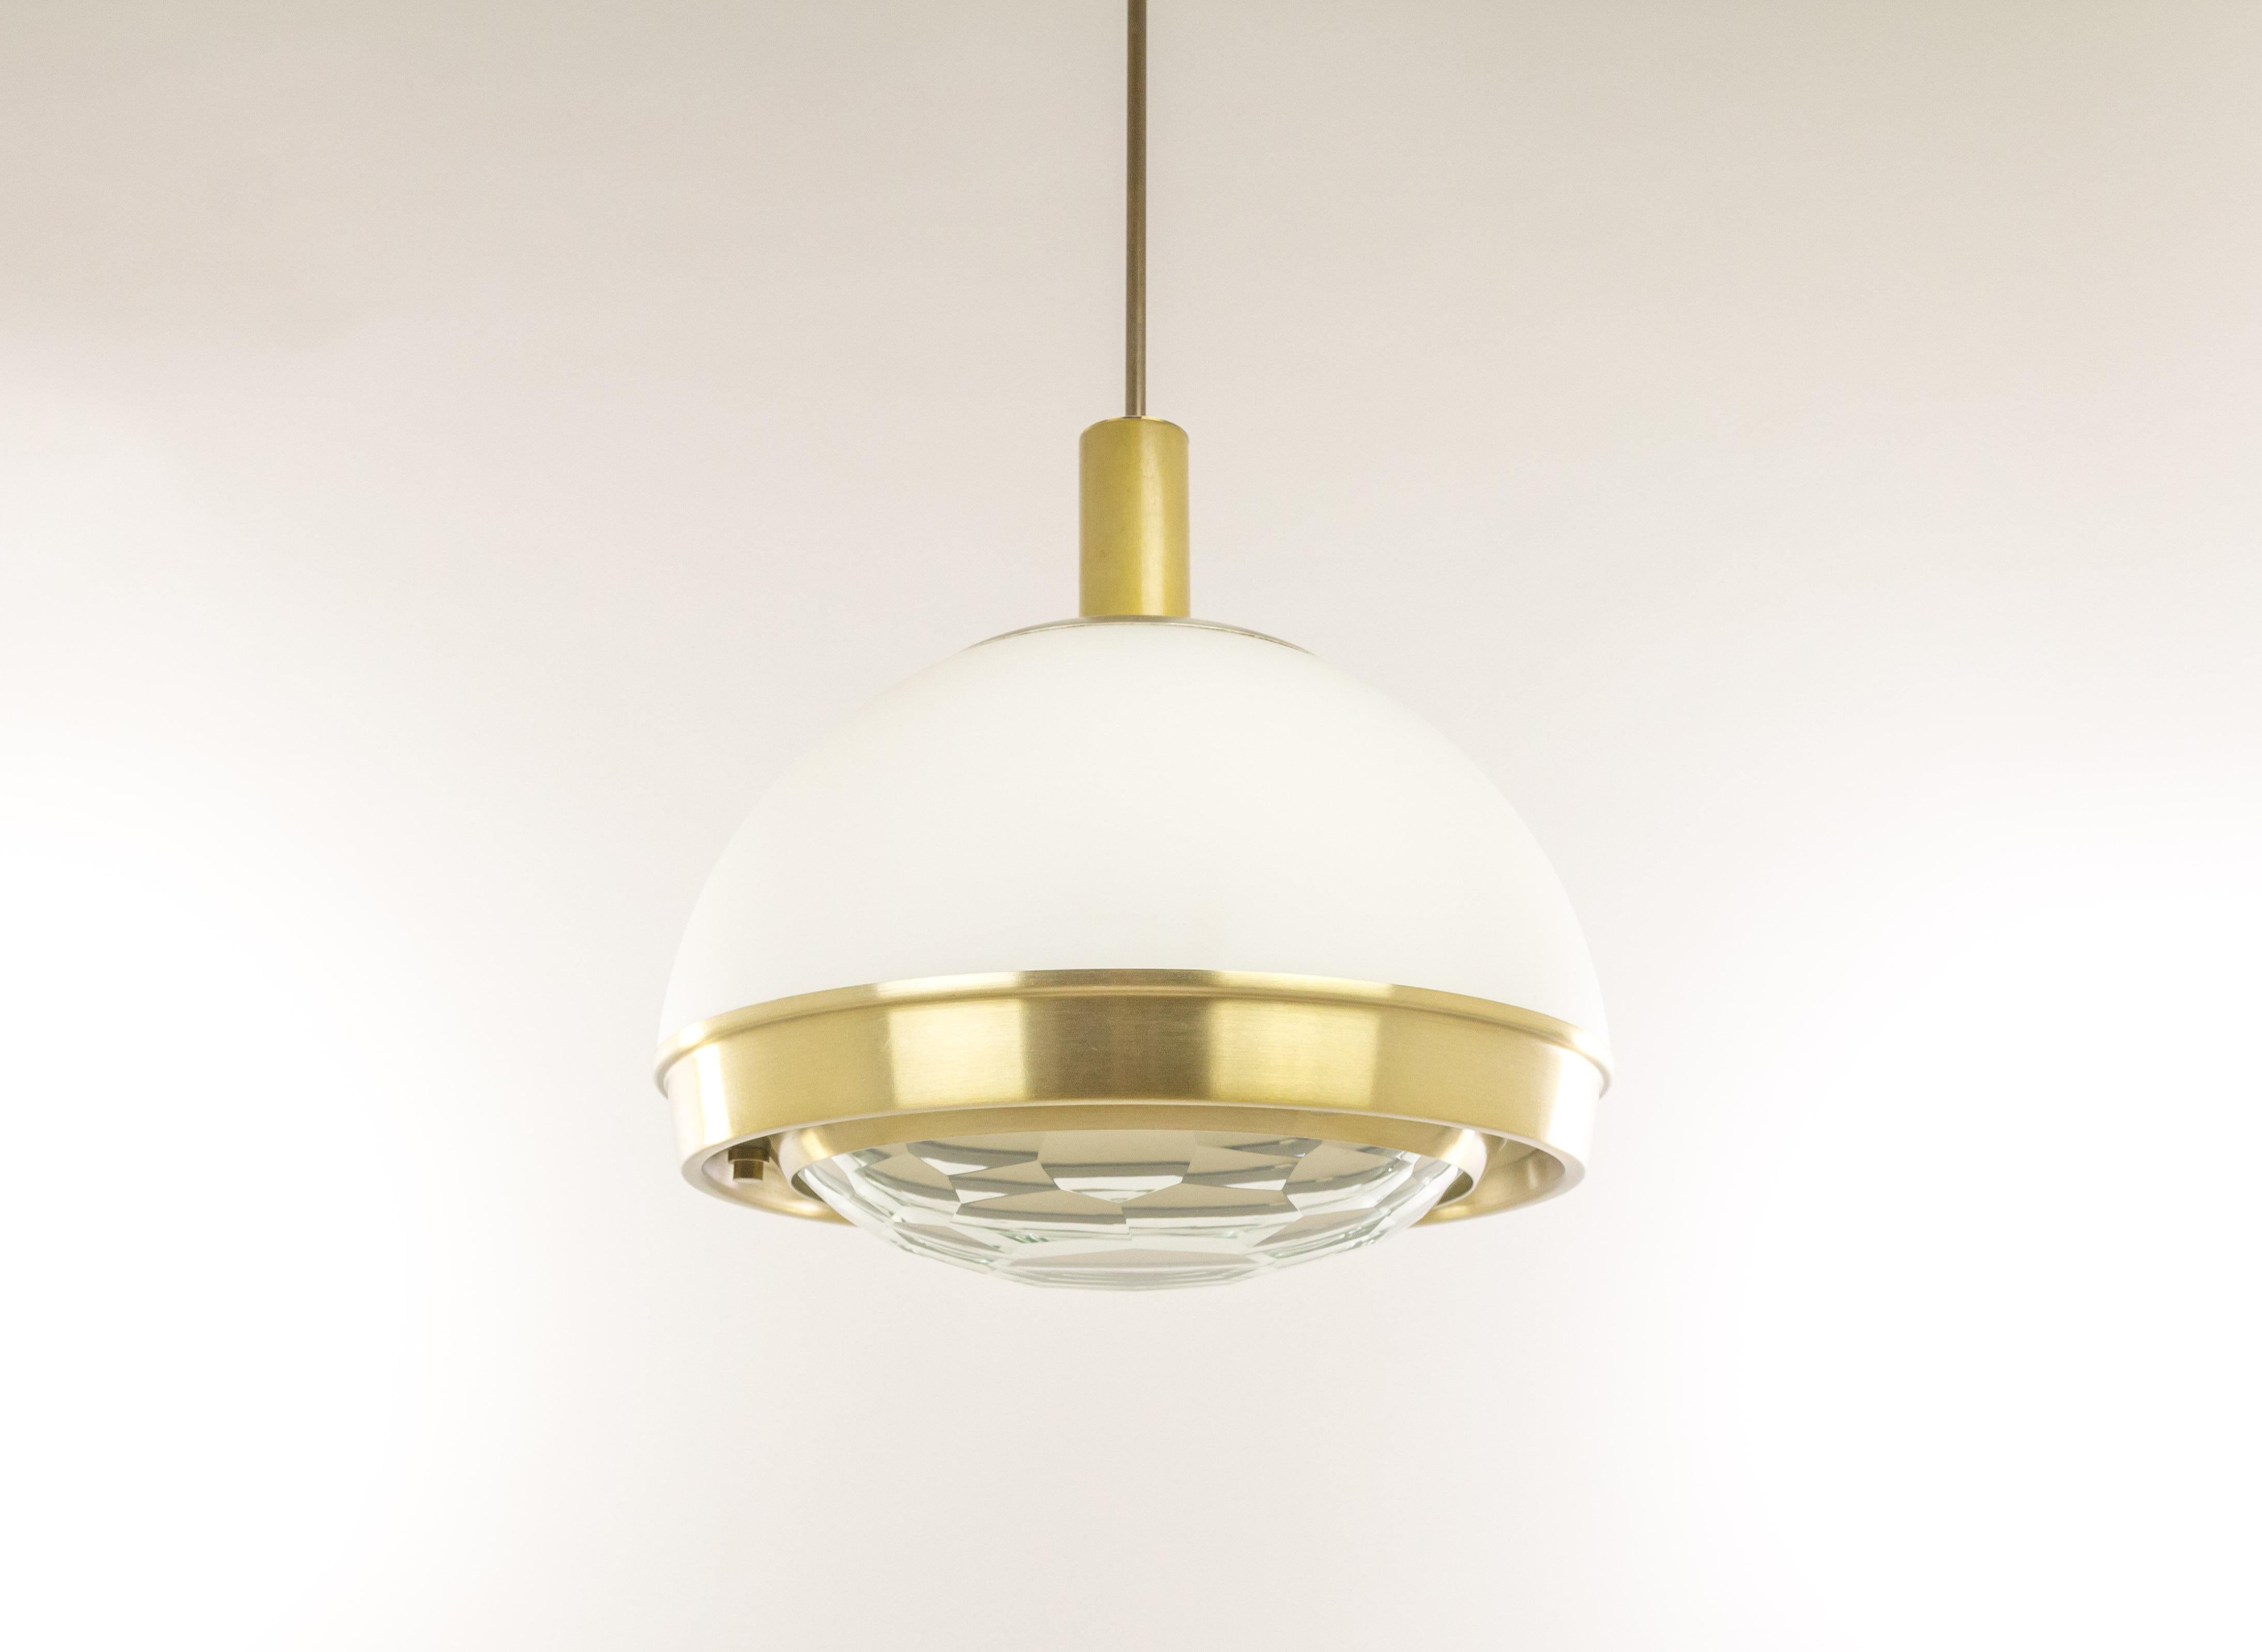 Faceted glass pendant by Italian lighting designer Pia Guidetti Crippa for Lumi Milano, 1960s.

Brass rings hold a white milk glass shade with at the bottom a facet cut clear crystal lens for a beautiful light experience.

Three-light sources.